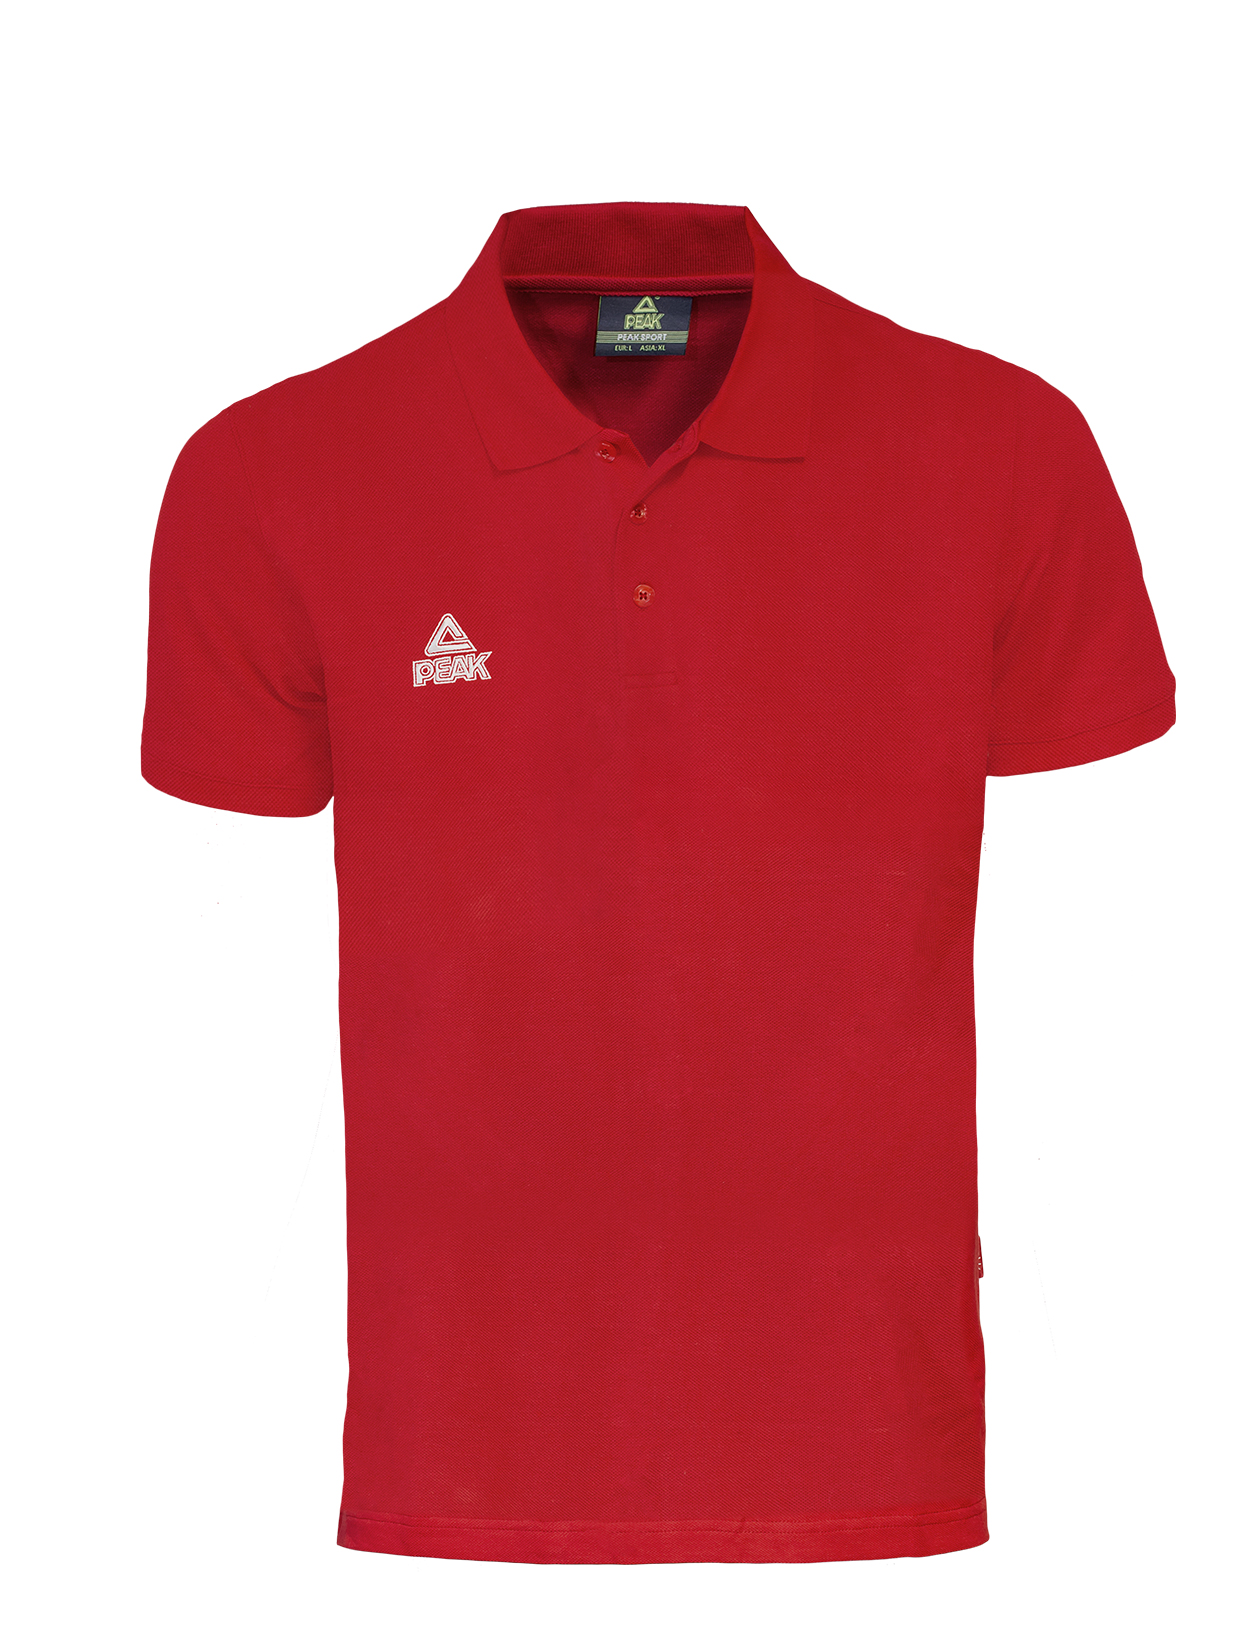 PEAK Polo Red